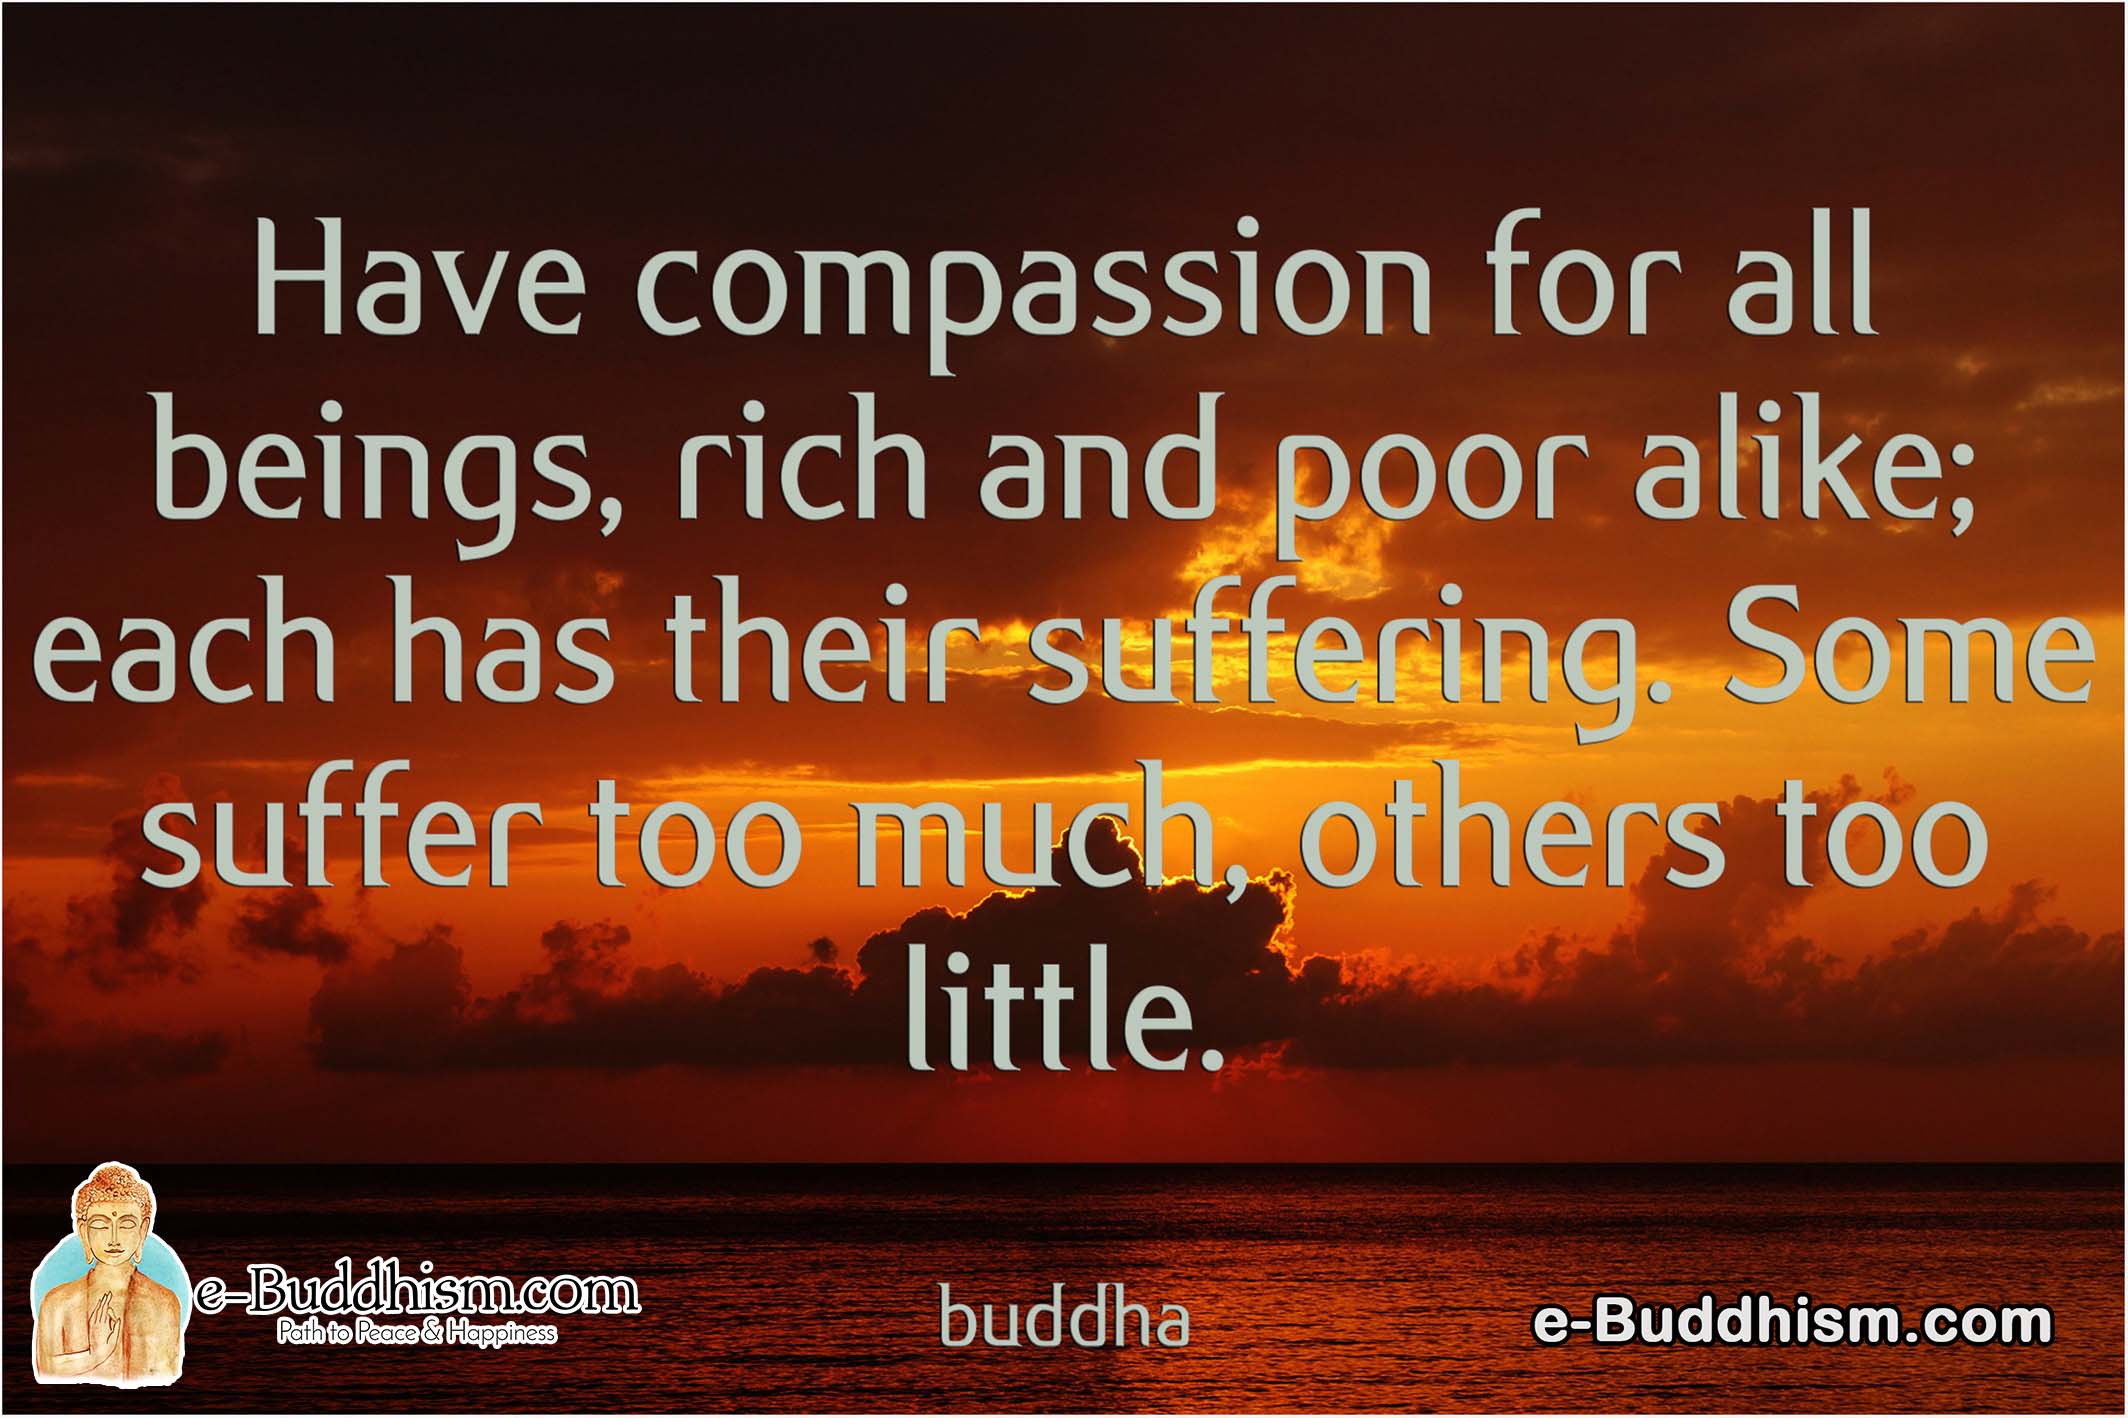 Have compassion for all being rich and poor alike; each has their suffering. Some suffer too much, others too little. -Buddha